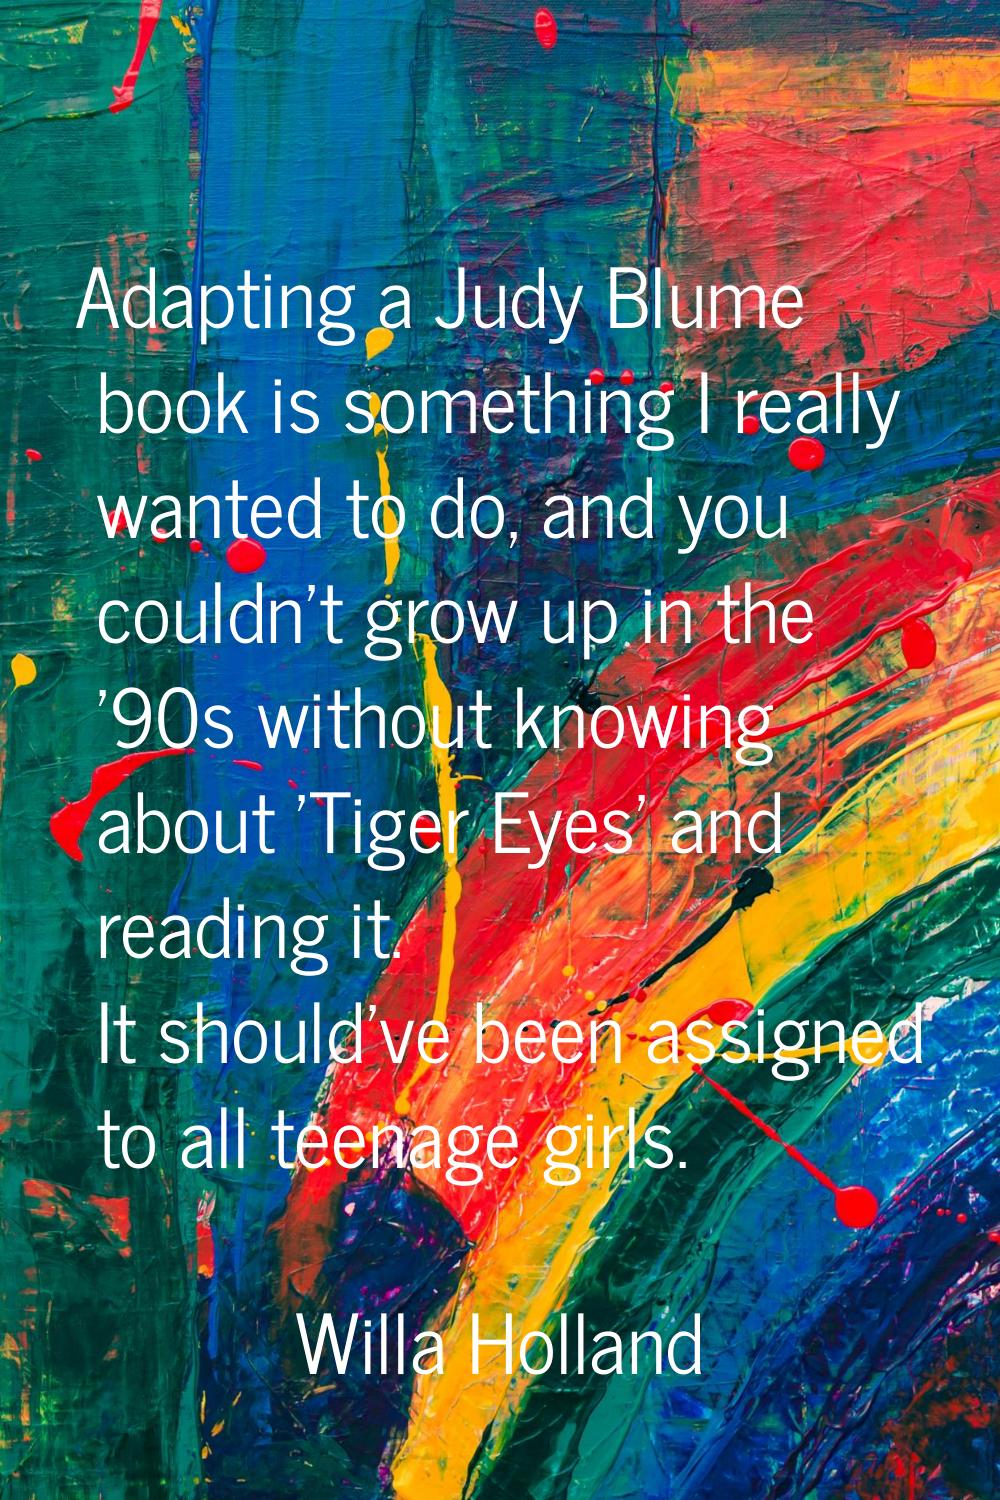 Adapting a Judy Blume book is something I really wanted to do, and you couldn't grow up in the '90s